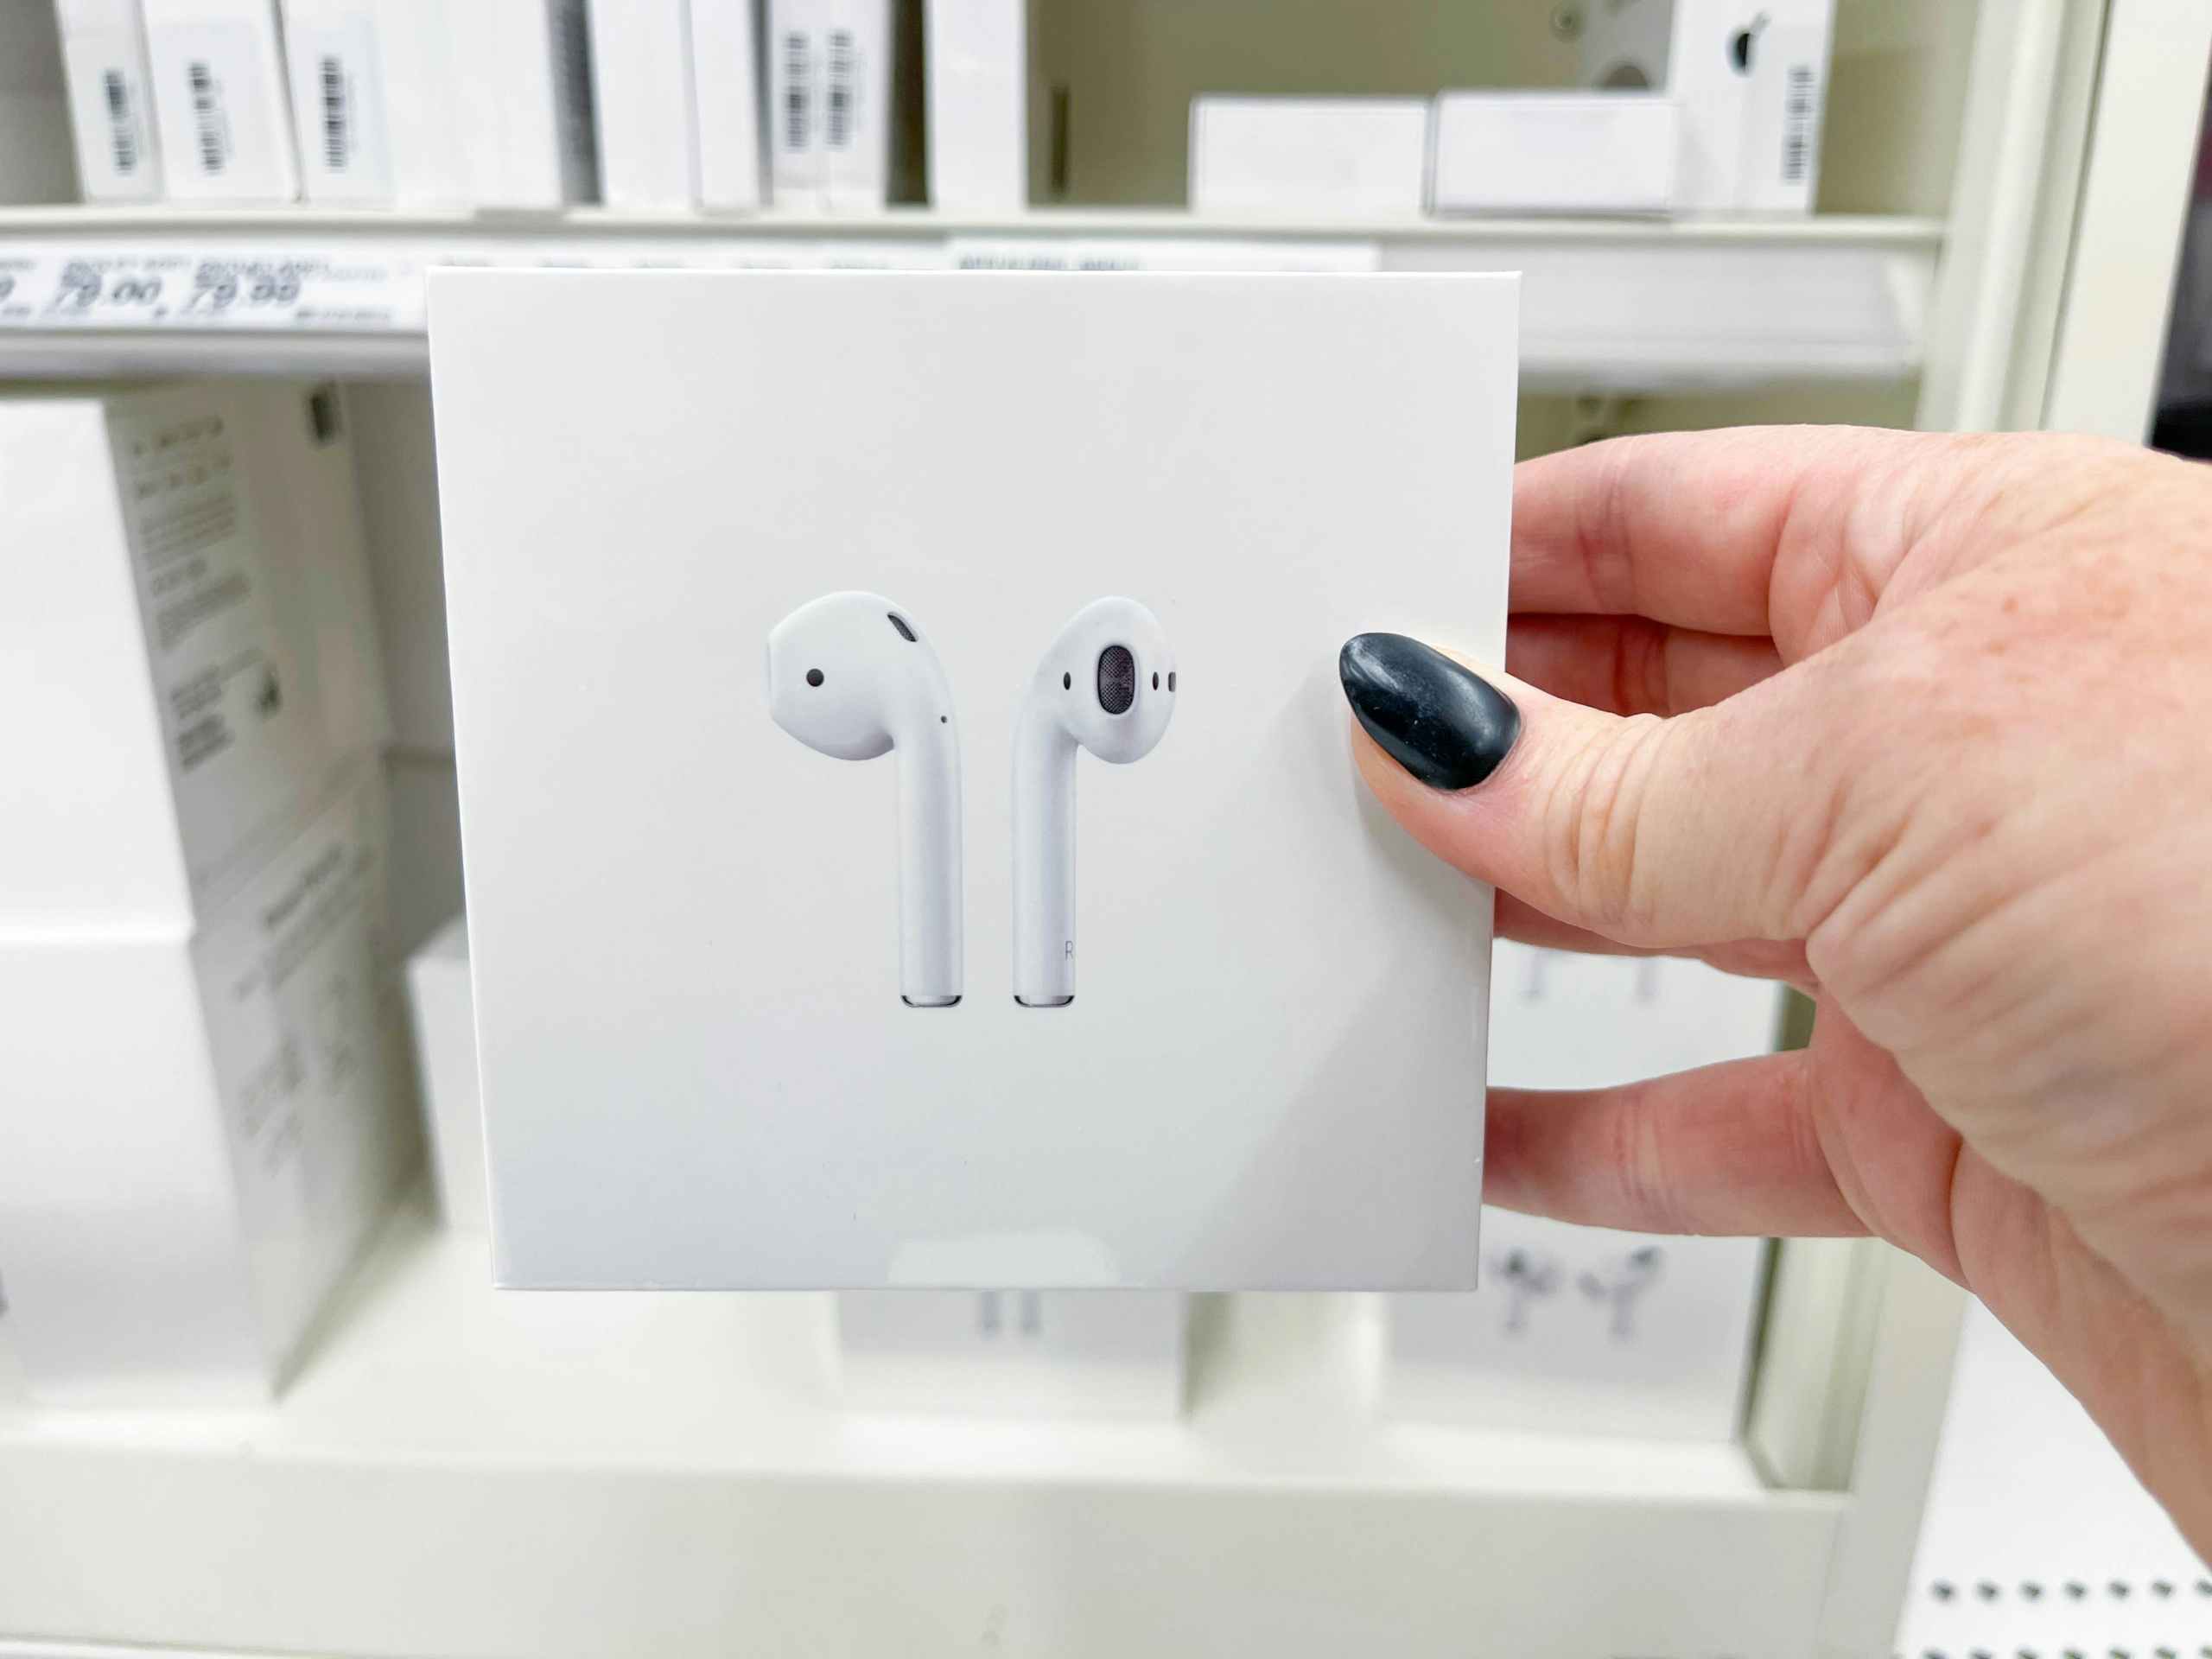 Apple AirPods (2nd Generation), $79.99 on Amazon (Lowest Price This Year)